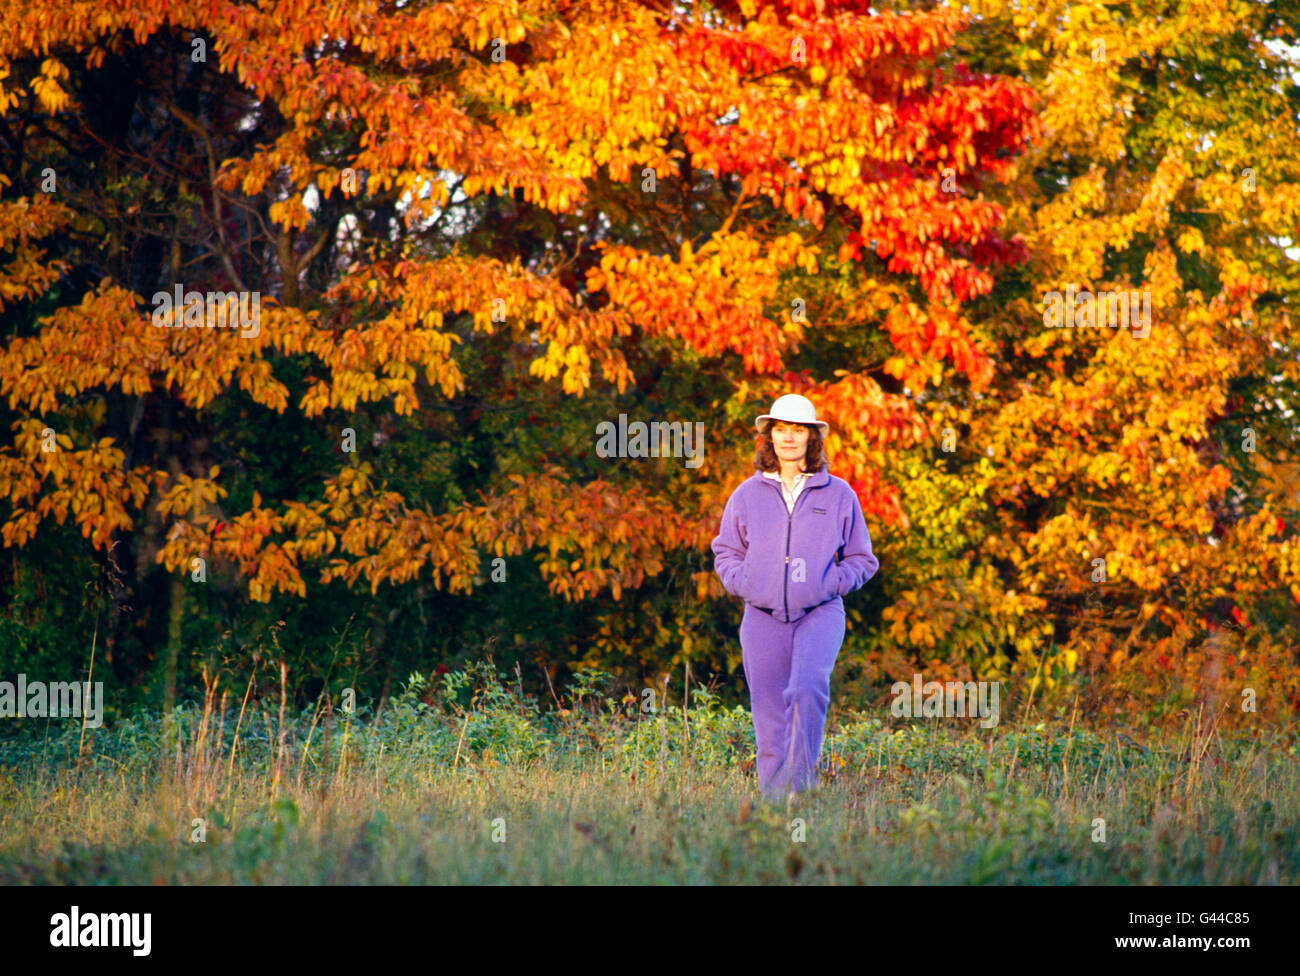 Woman walking in fields surrounded by autumn fall colors Stock Photo